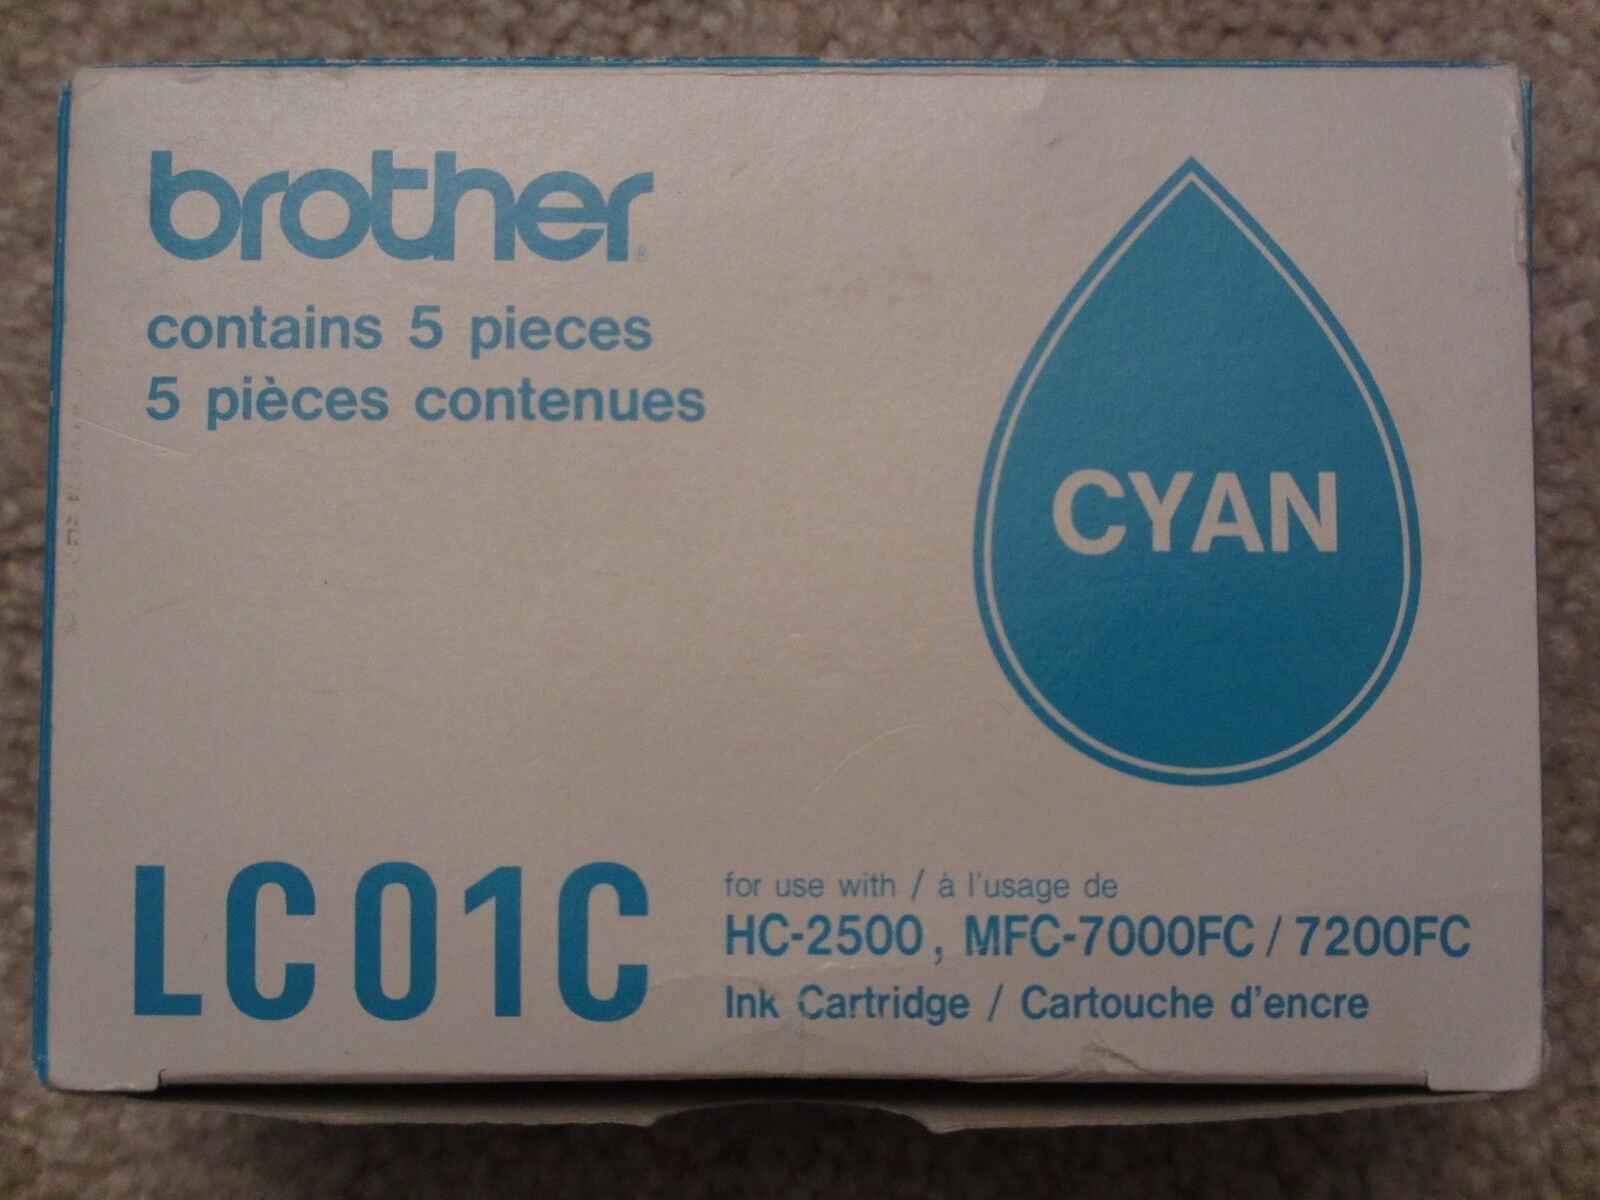 ☀️ 5-Pack GENUINE NEW BROTHER LC01C Cyan Ink Cartridge Tank HC-2500 - EXPIRED